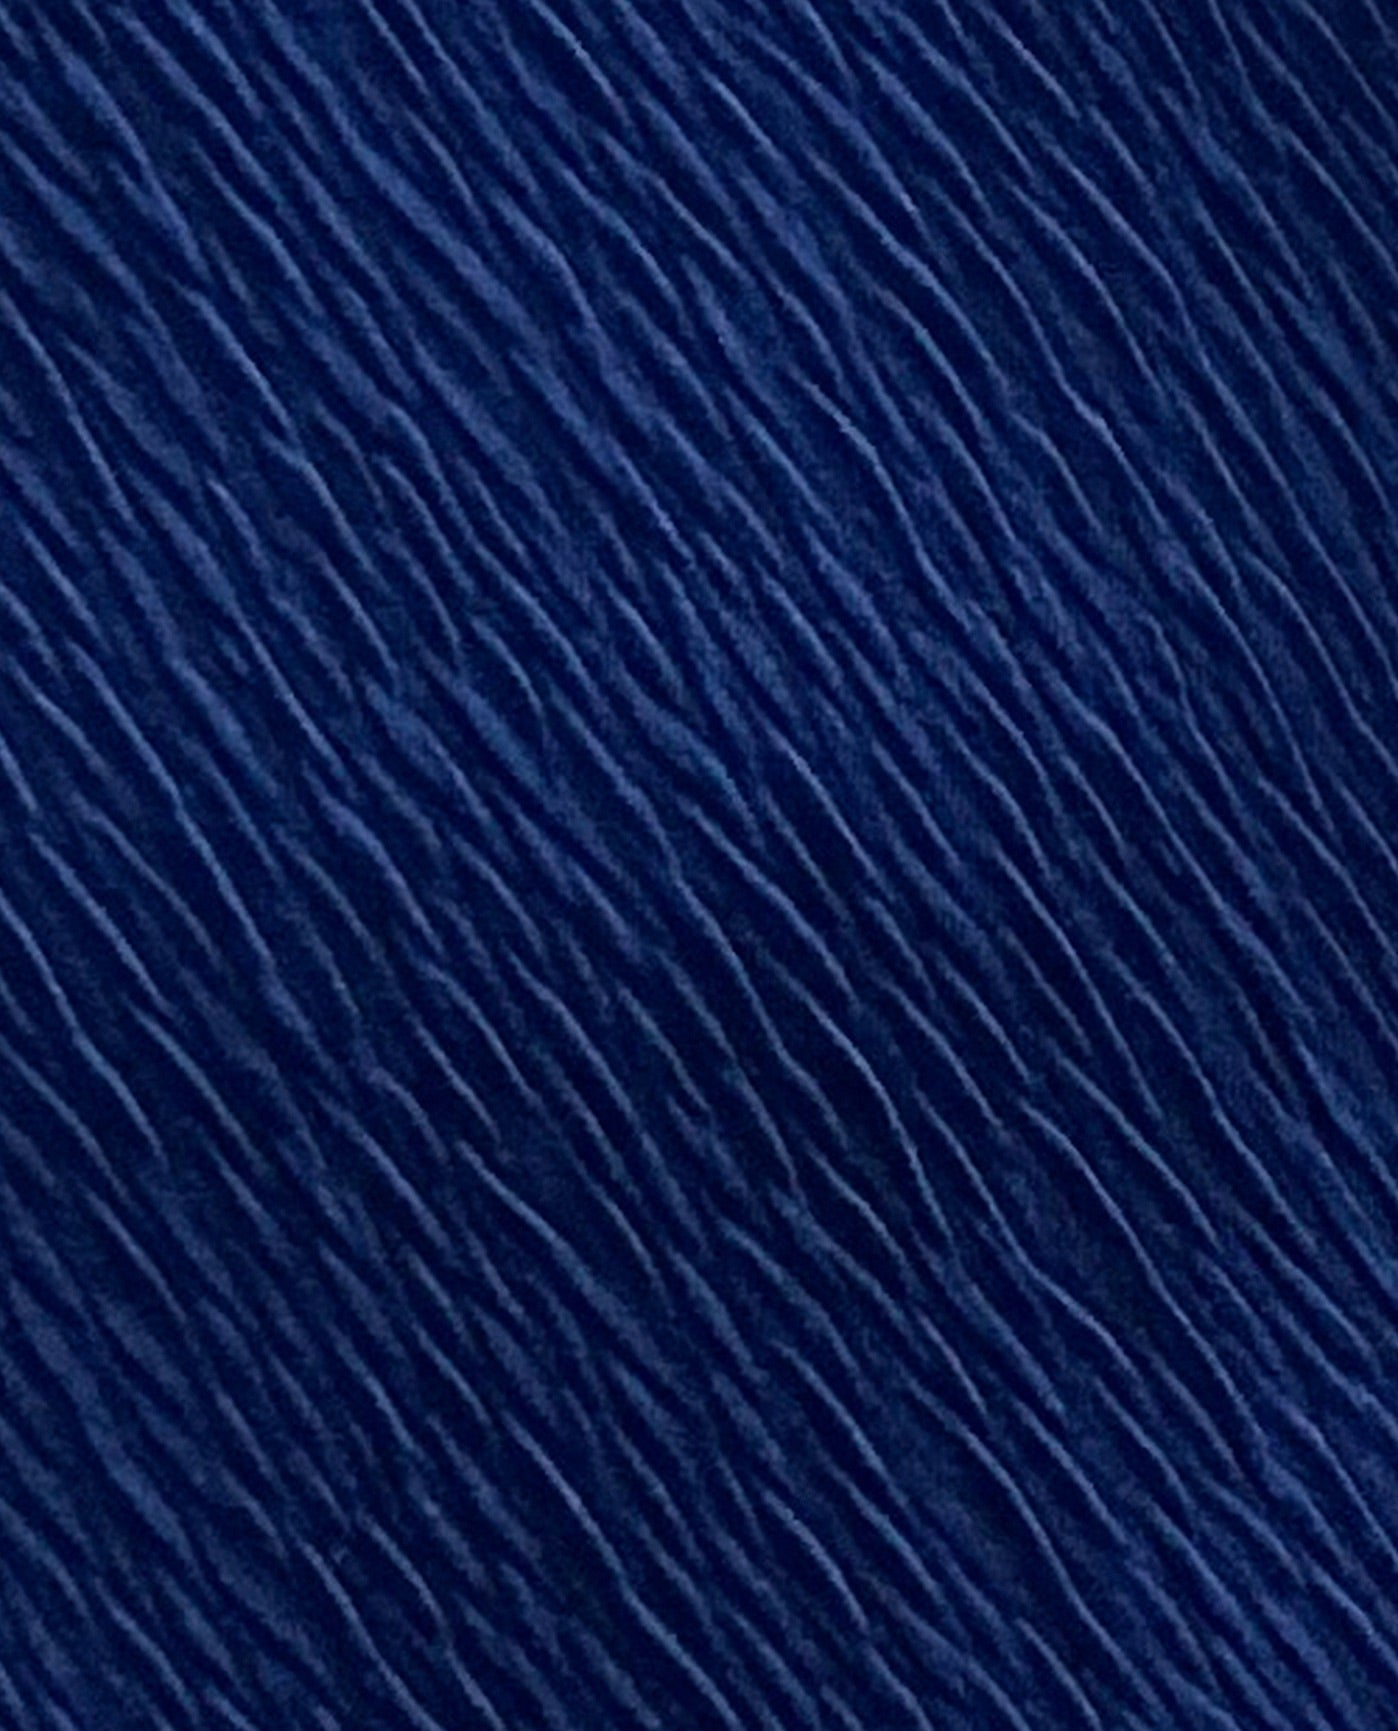 FABRIC DETAIL VIEW OF CHLORINE RESISTANT AQUAMORE SOLID LUXE TEXTURED HIGH NECK PLUS SIZE SWIMSUIT | 058AQL LUXE NAVY